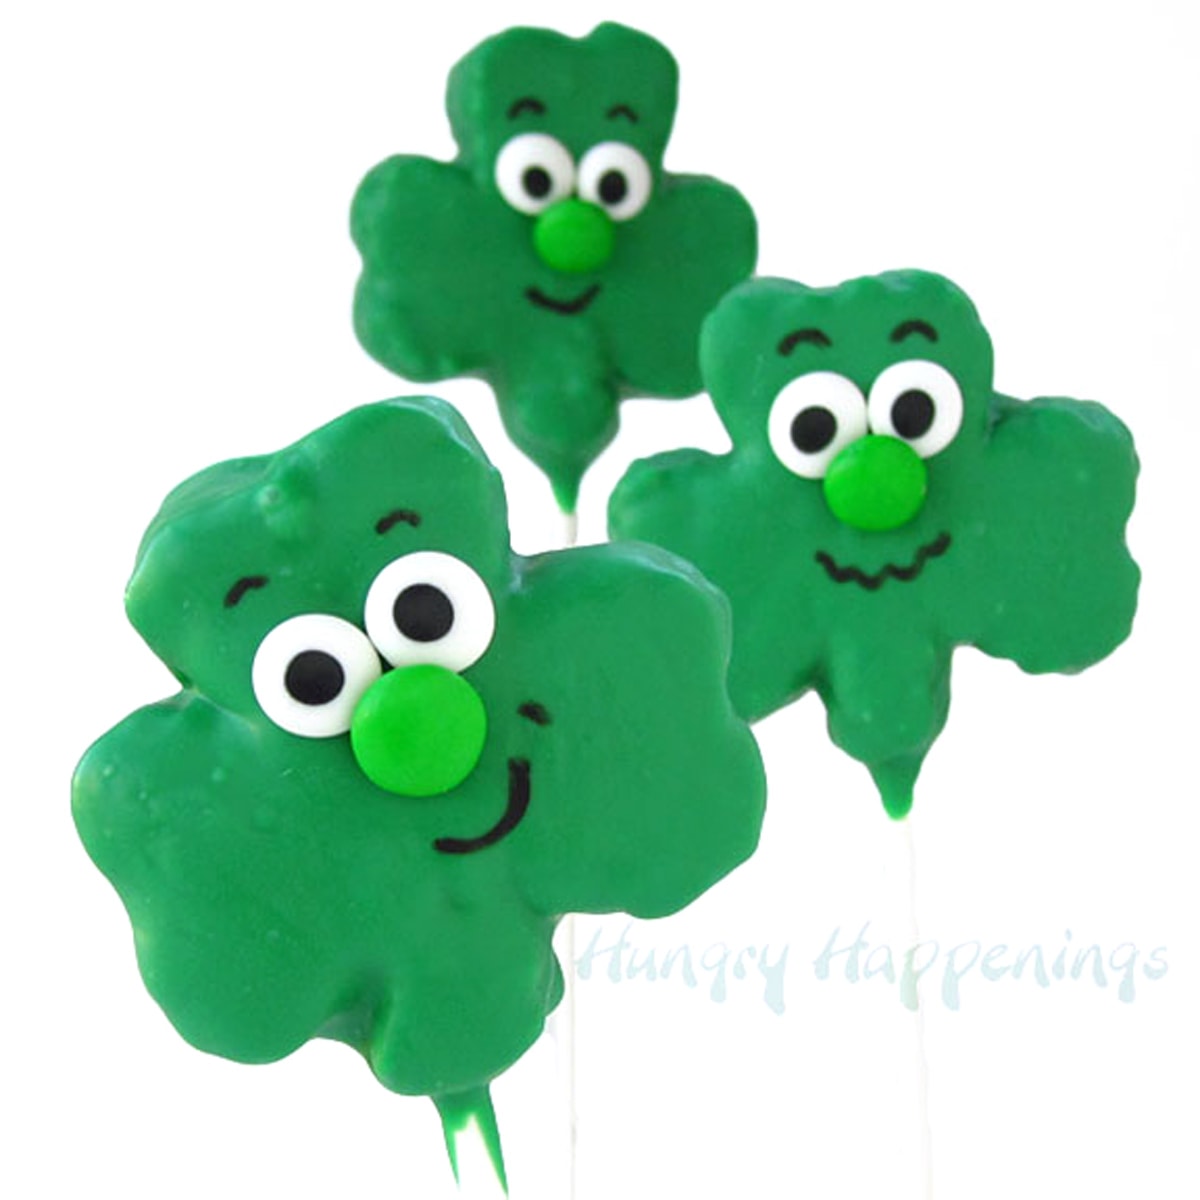 White chocolate coated shamrock rice krispie treat pops with cute smiley faces.